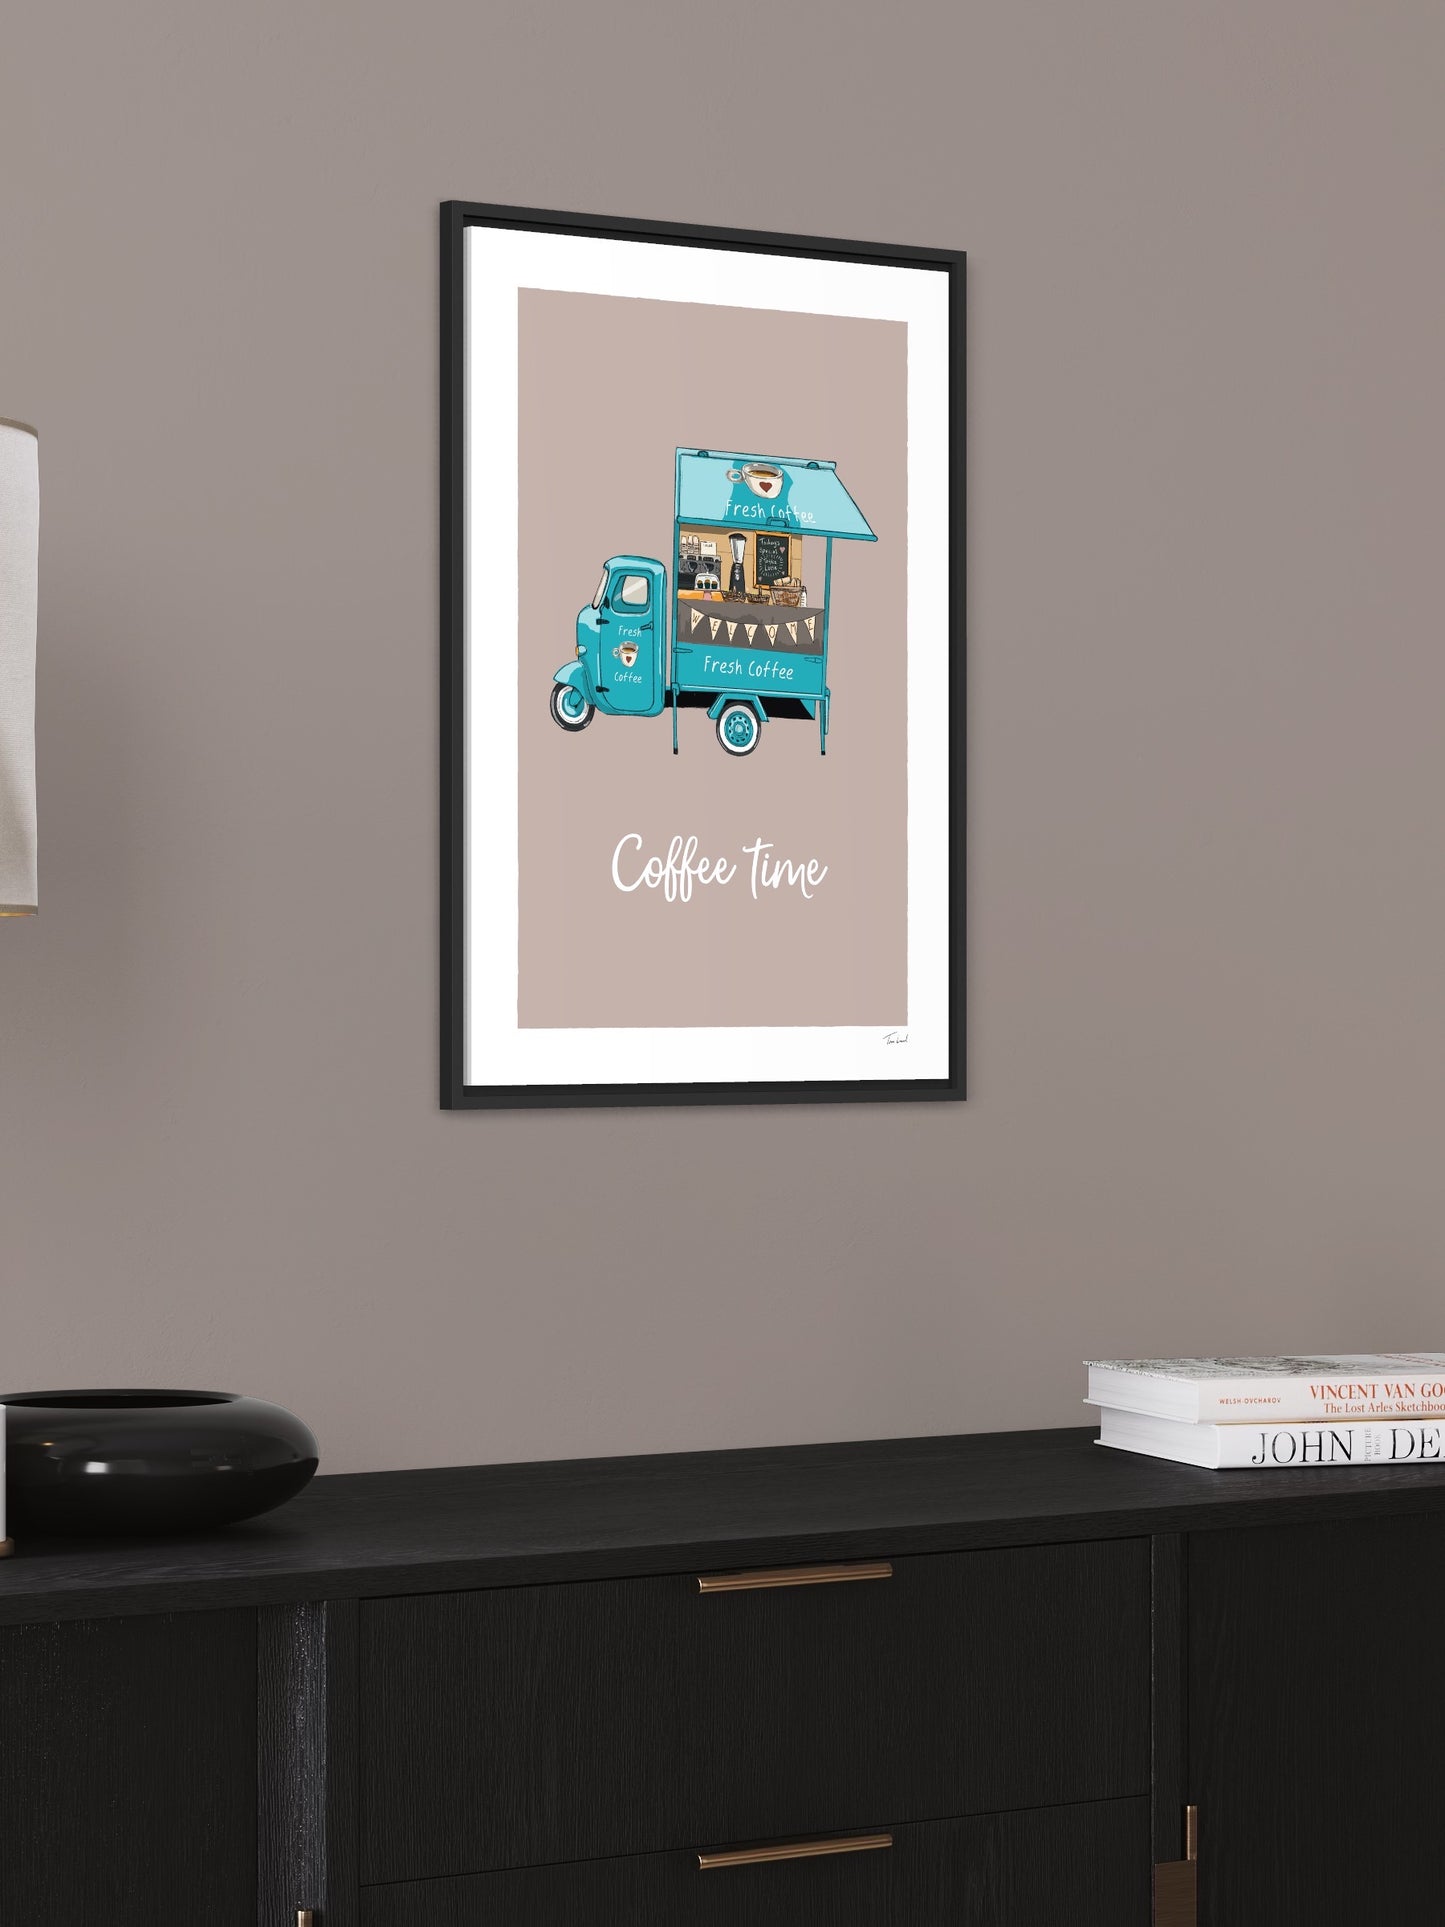 This image shows a giclee wall art print by Tom Laird Illustration of a little barista coffee tuk tuk, framed in a beautiful living room with tasteful modern home decor. This art print is available from Tom Laird Illustration in various sizes.